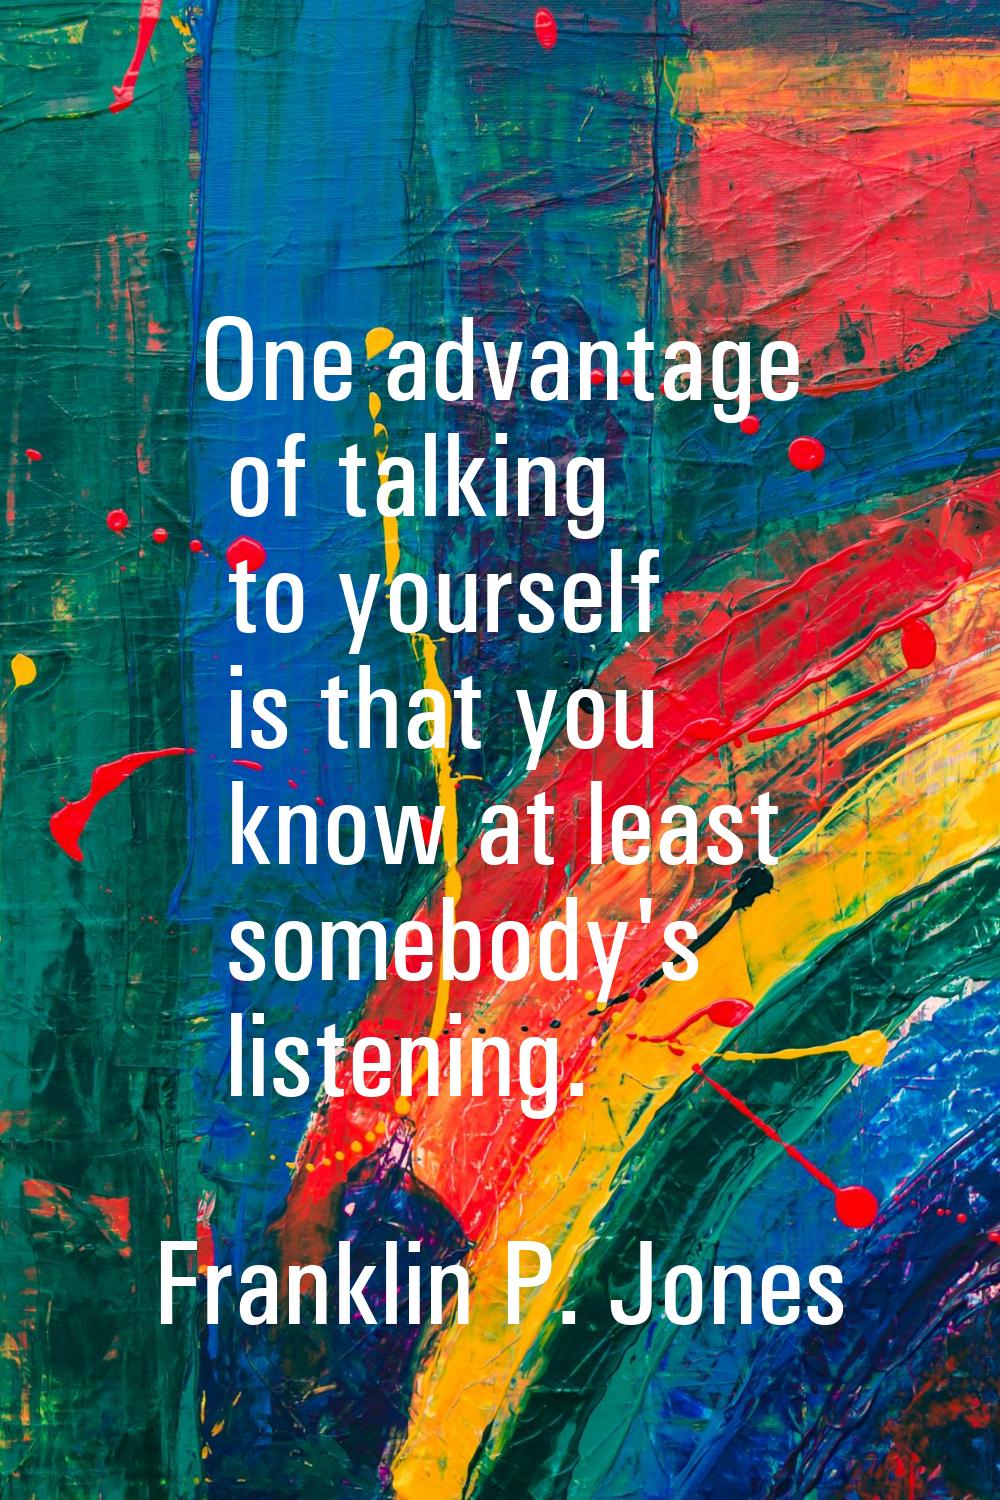 One advantage of talking to yourself is that you know at least somebody's listening.